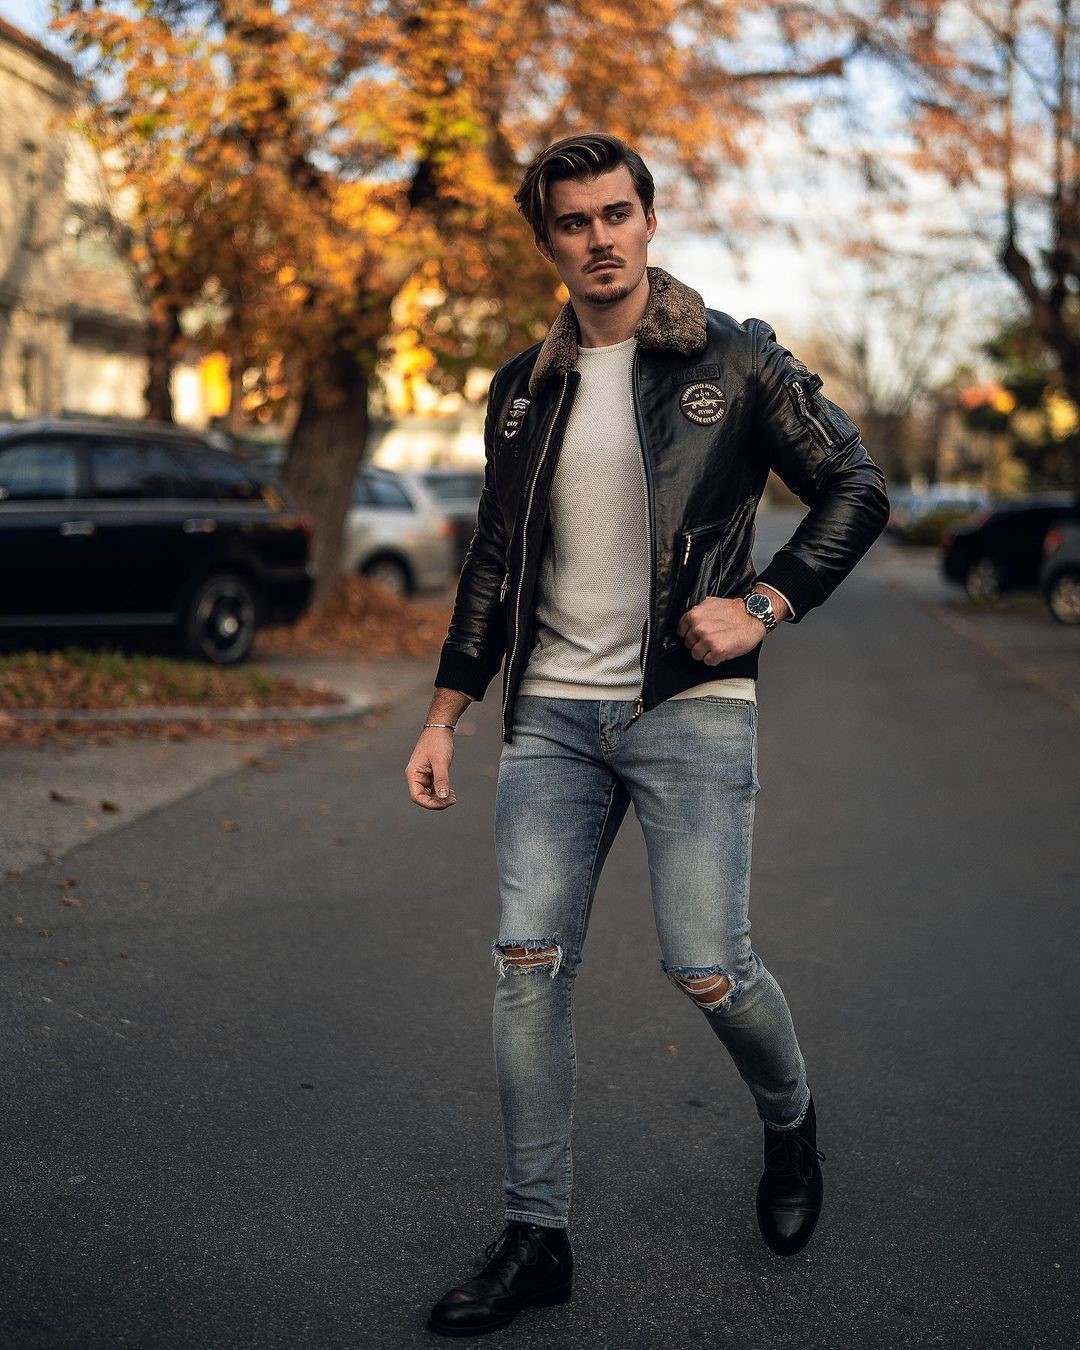 Why You Should Buy Leather Jackets Top Reasons - The Fashion Wolf